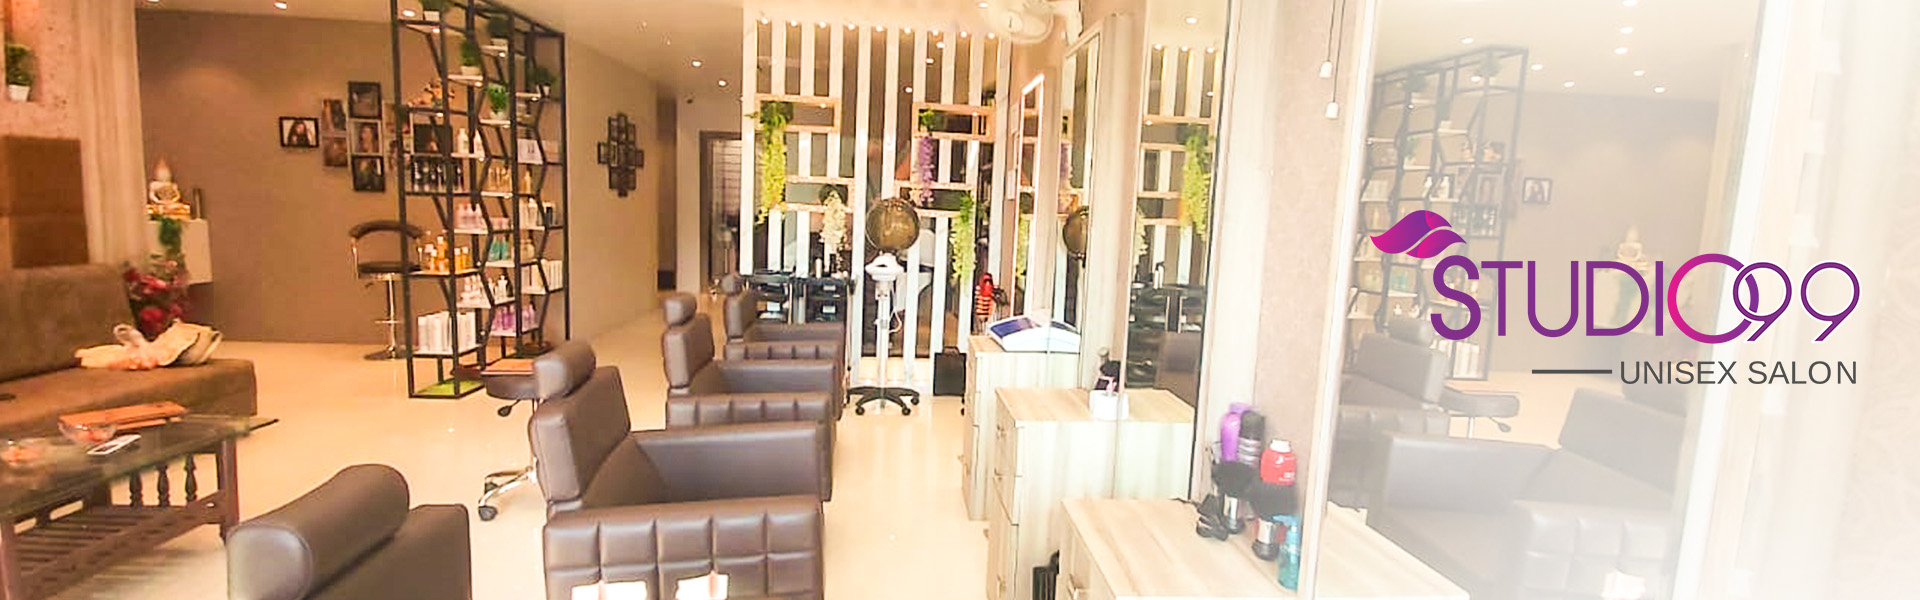 Affordable Franchise oppurtunity for Studio99 Salon in all over India